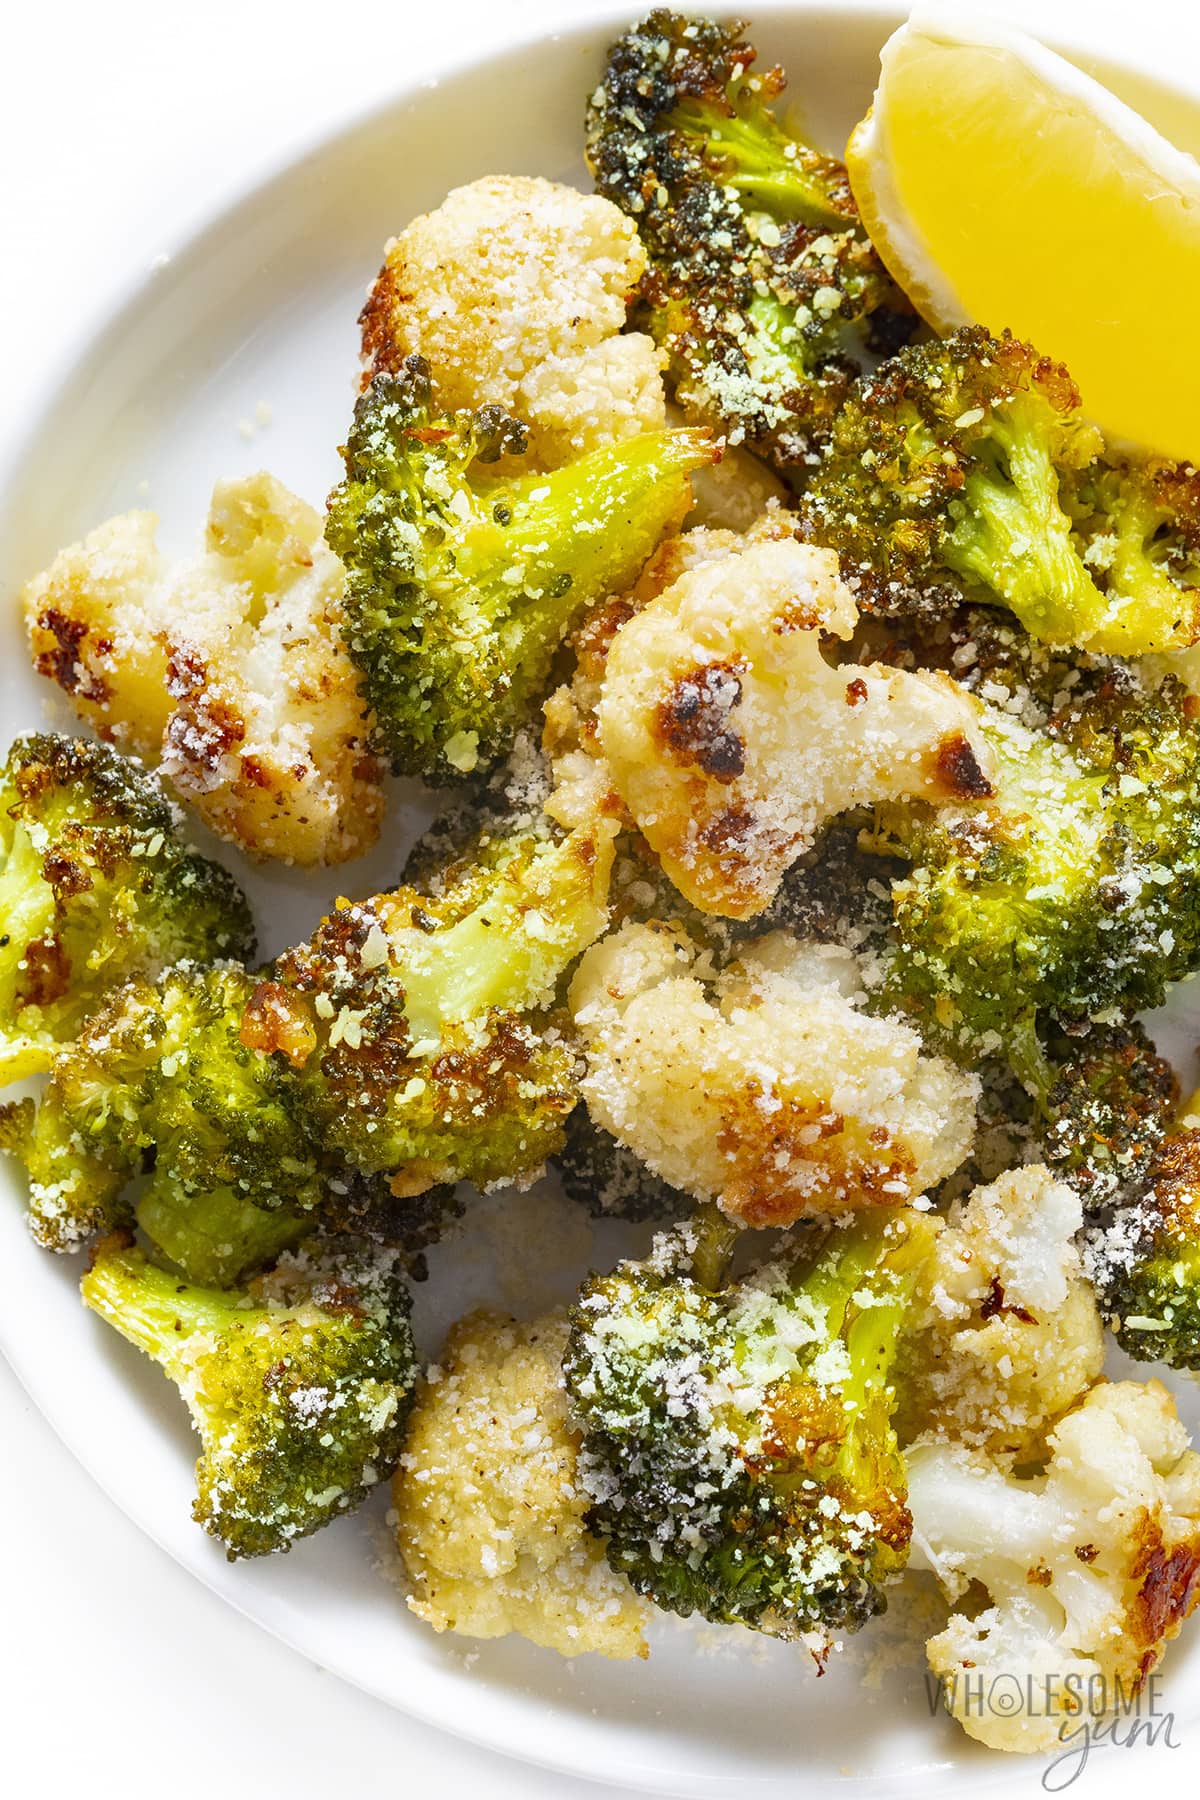 Parmesan cauliflower and broccoli on a plate with lemon wedge.